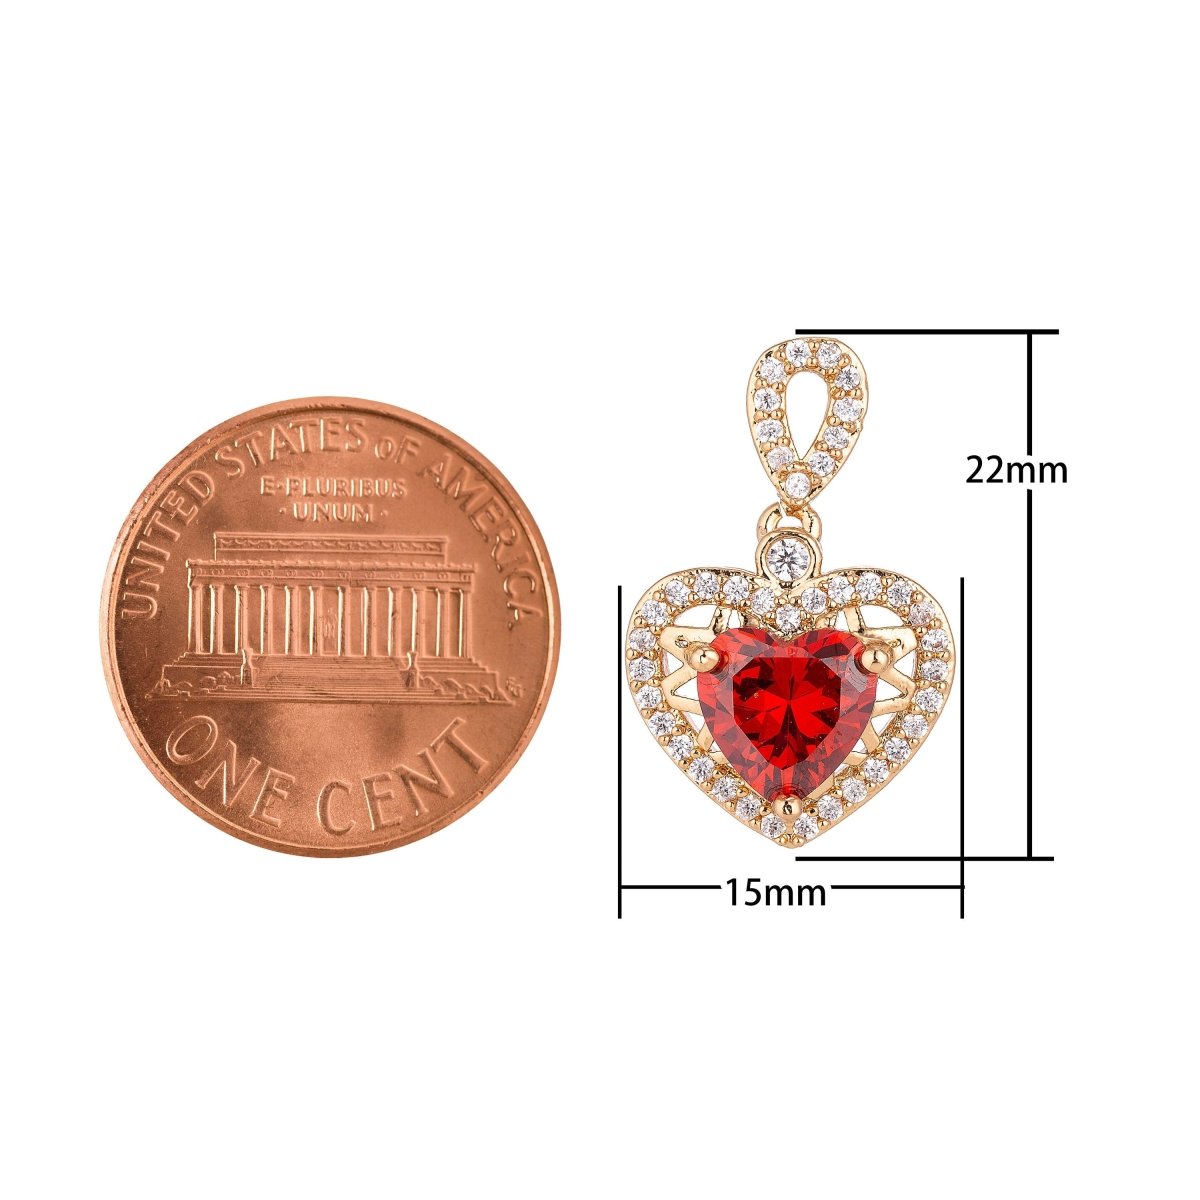 Dainty 18k Gold Filled Red Emerald Heart Love Charm Pendant Classic Love Heart Cut Cubic Zircon Gemstone Necklace for Jewelry Making Valentines Day H-238 - DLUXCA